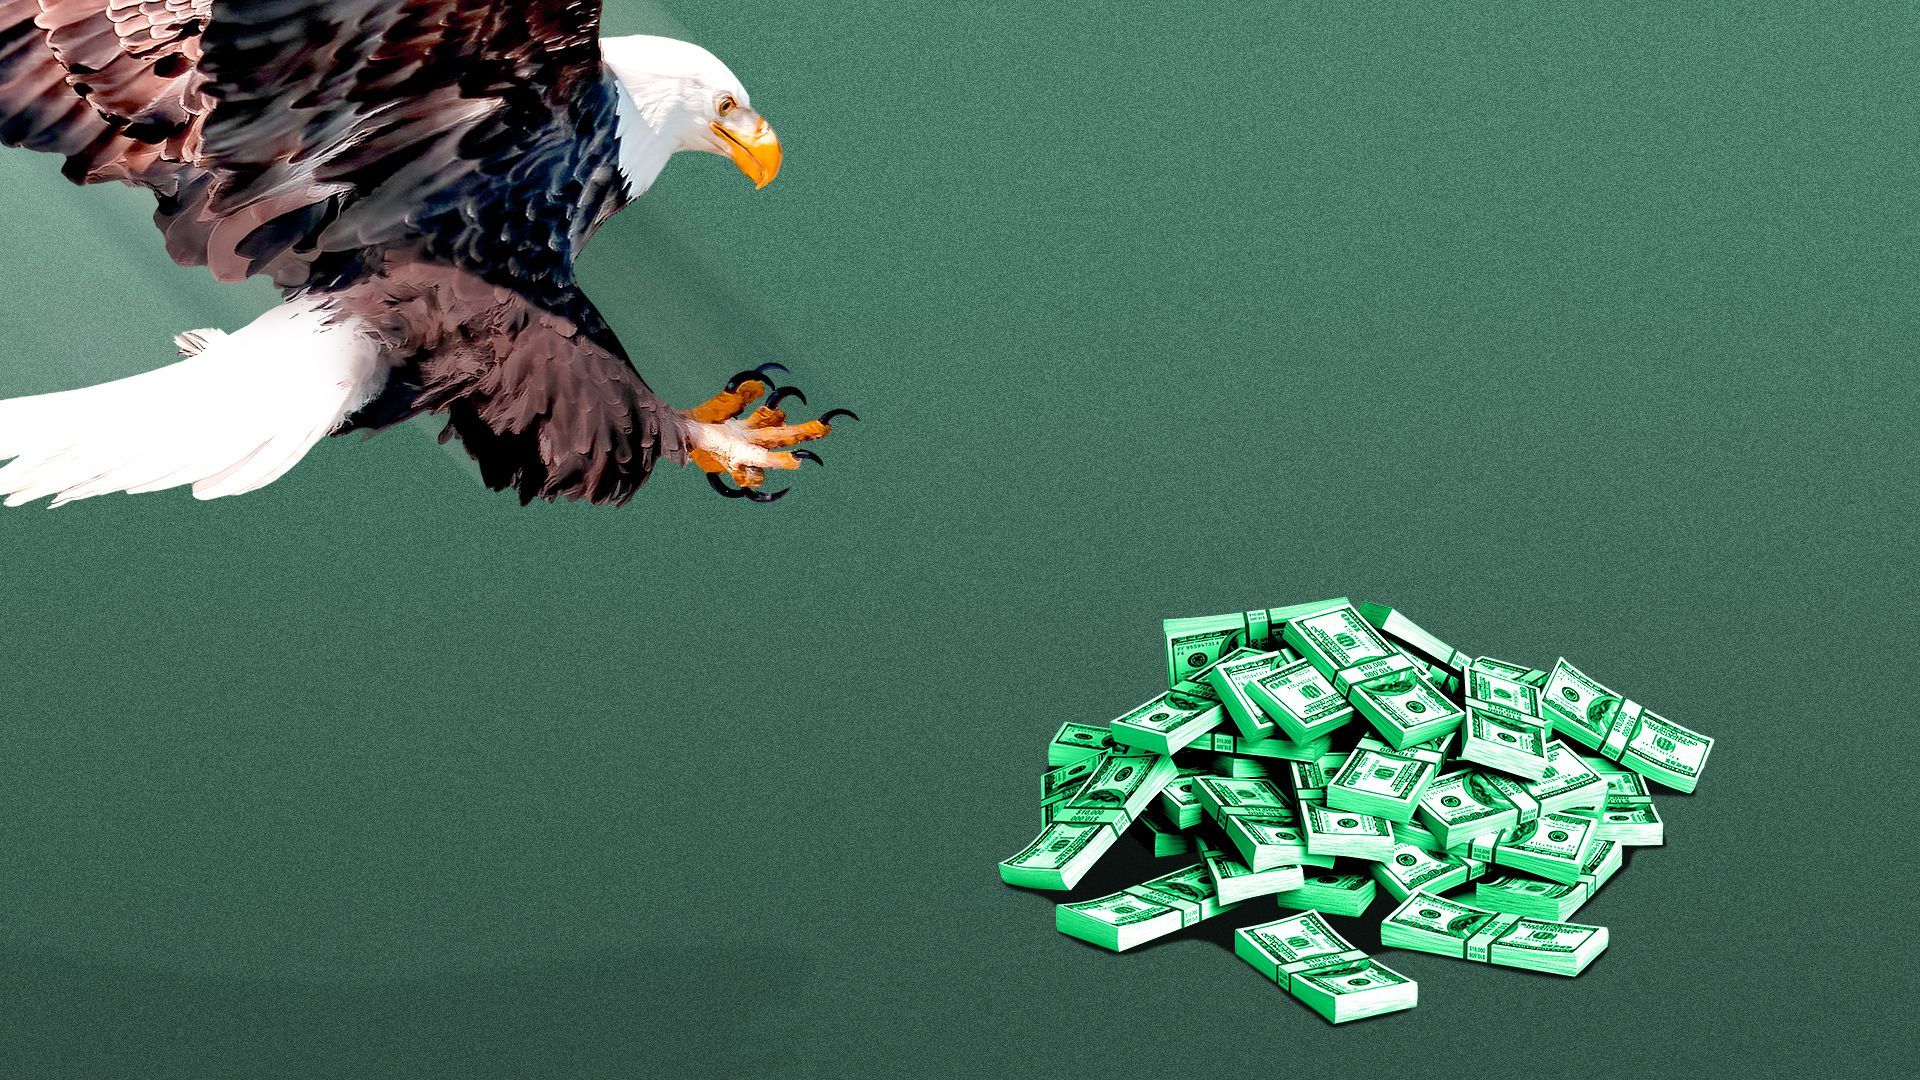 Illustration of an eagle swooping in on a pile of cash.